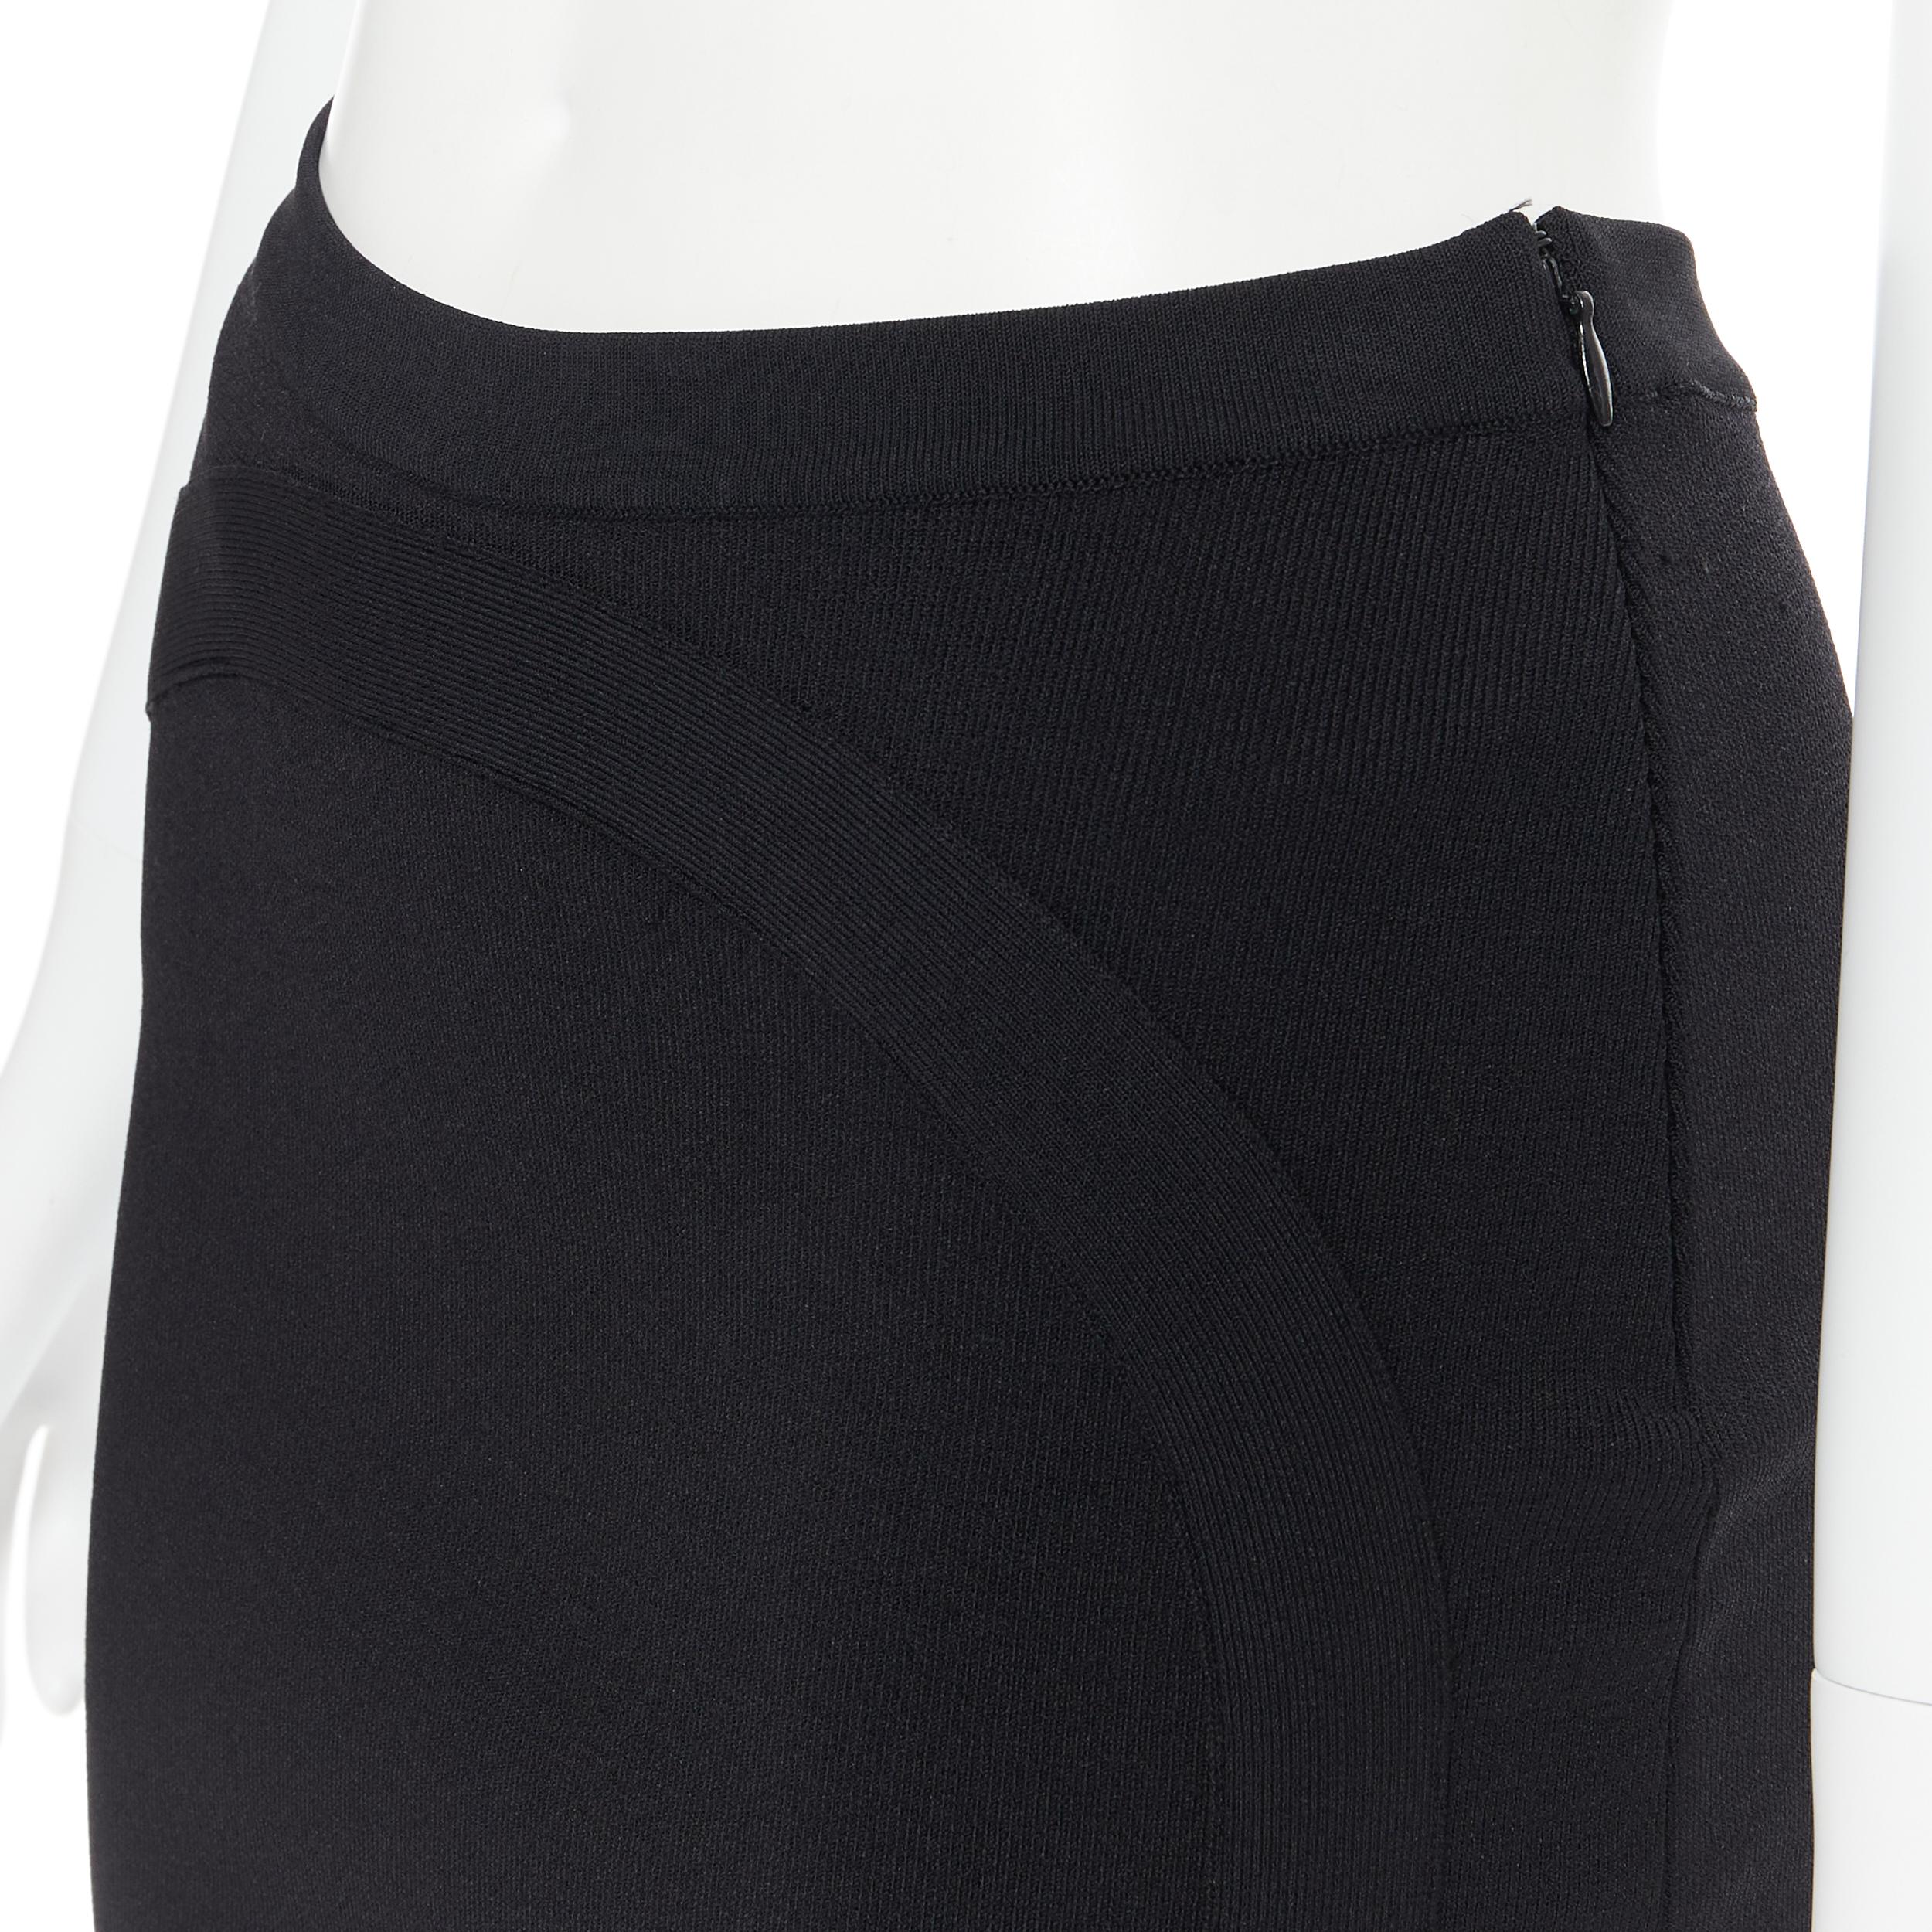 GIVENCHY black viscose knit curved circular trimming stretch pencil skirt S For Sale 2